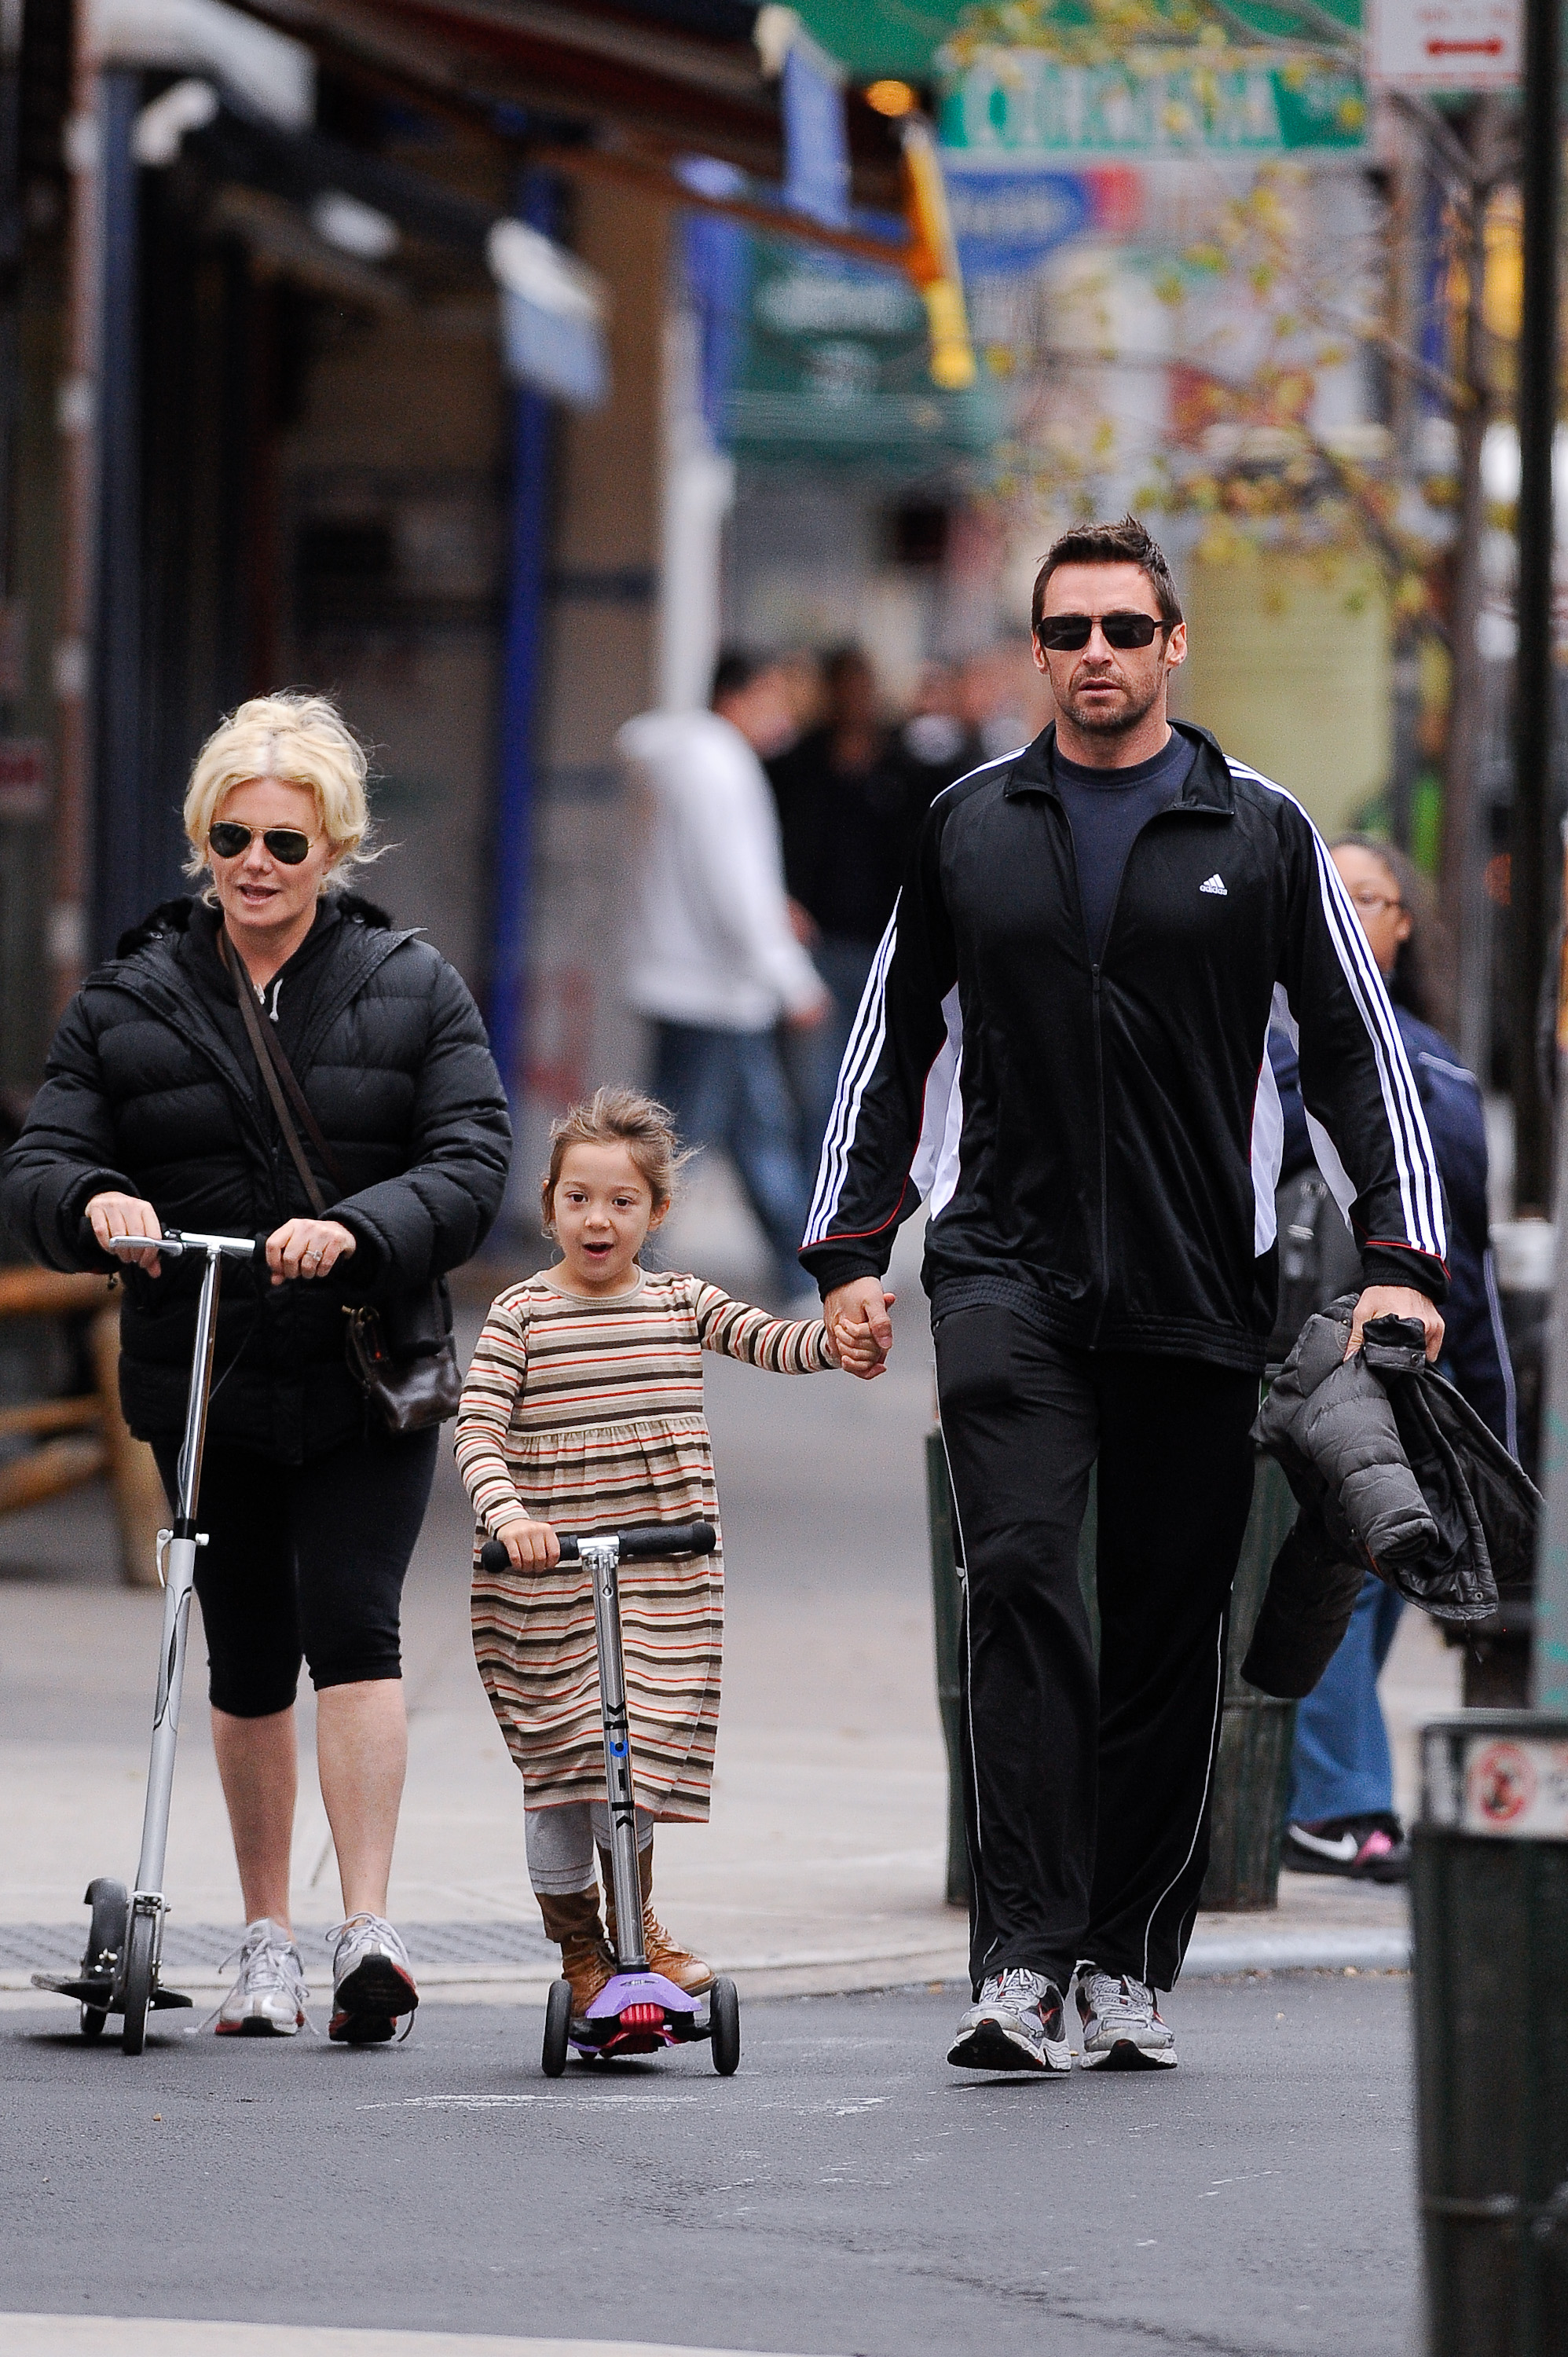 Deborra-Lee Furness, Ava, and Hugh Jackman in New York City on October 29, 2010 | Source: Getty Images